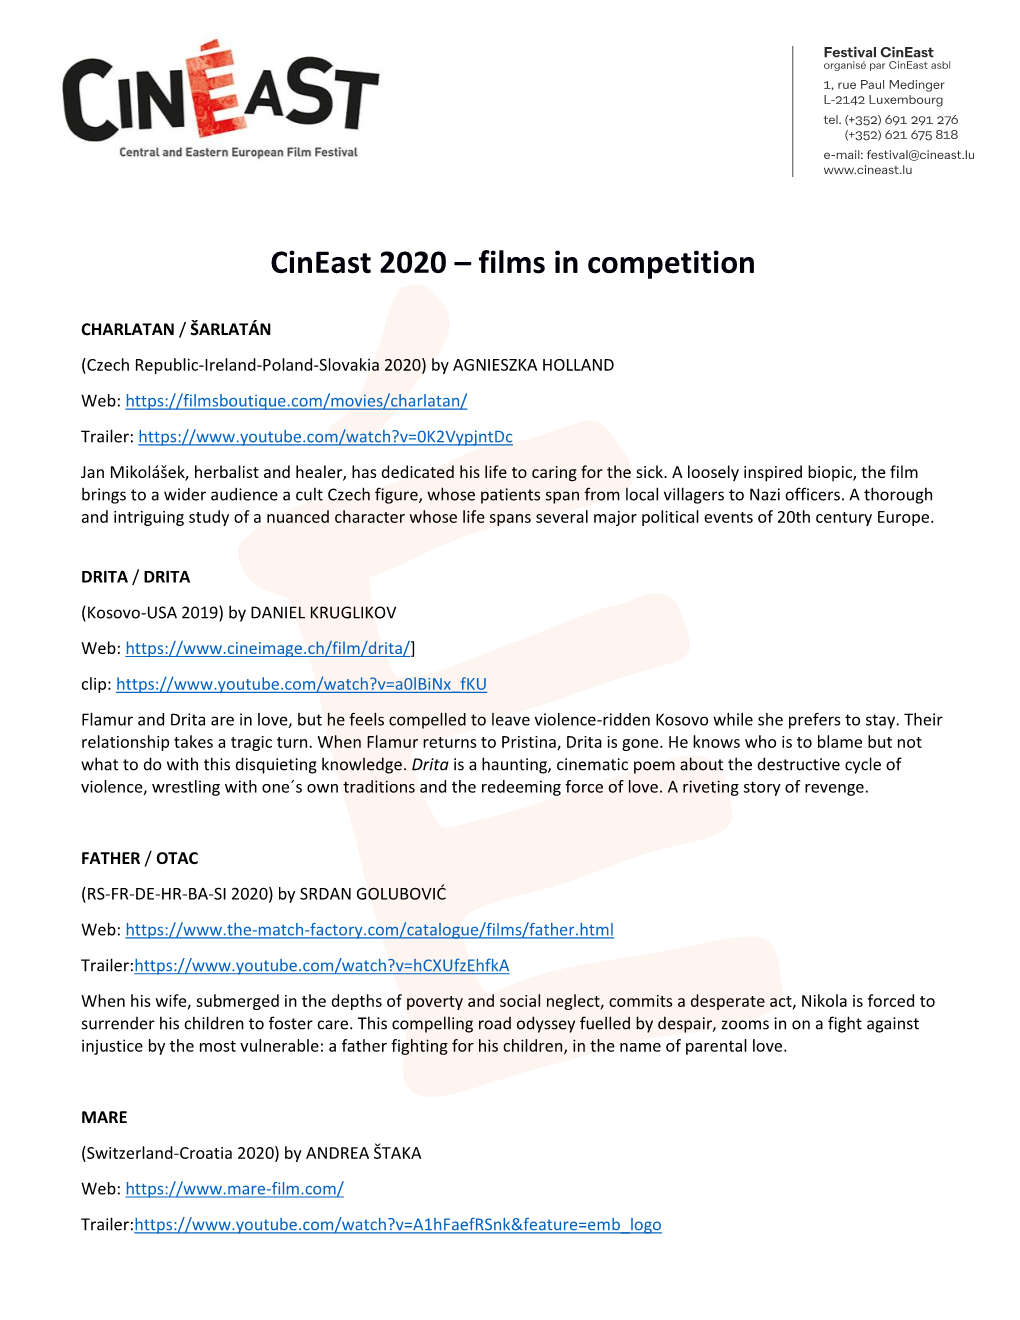 Cineast 2020 – Films in Competition